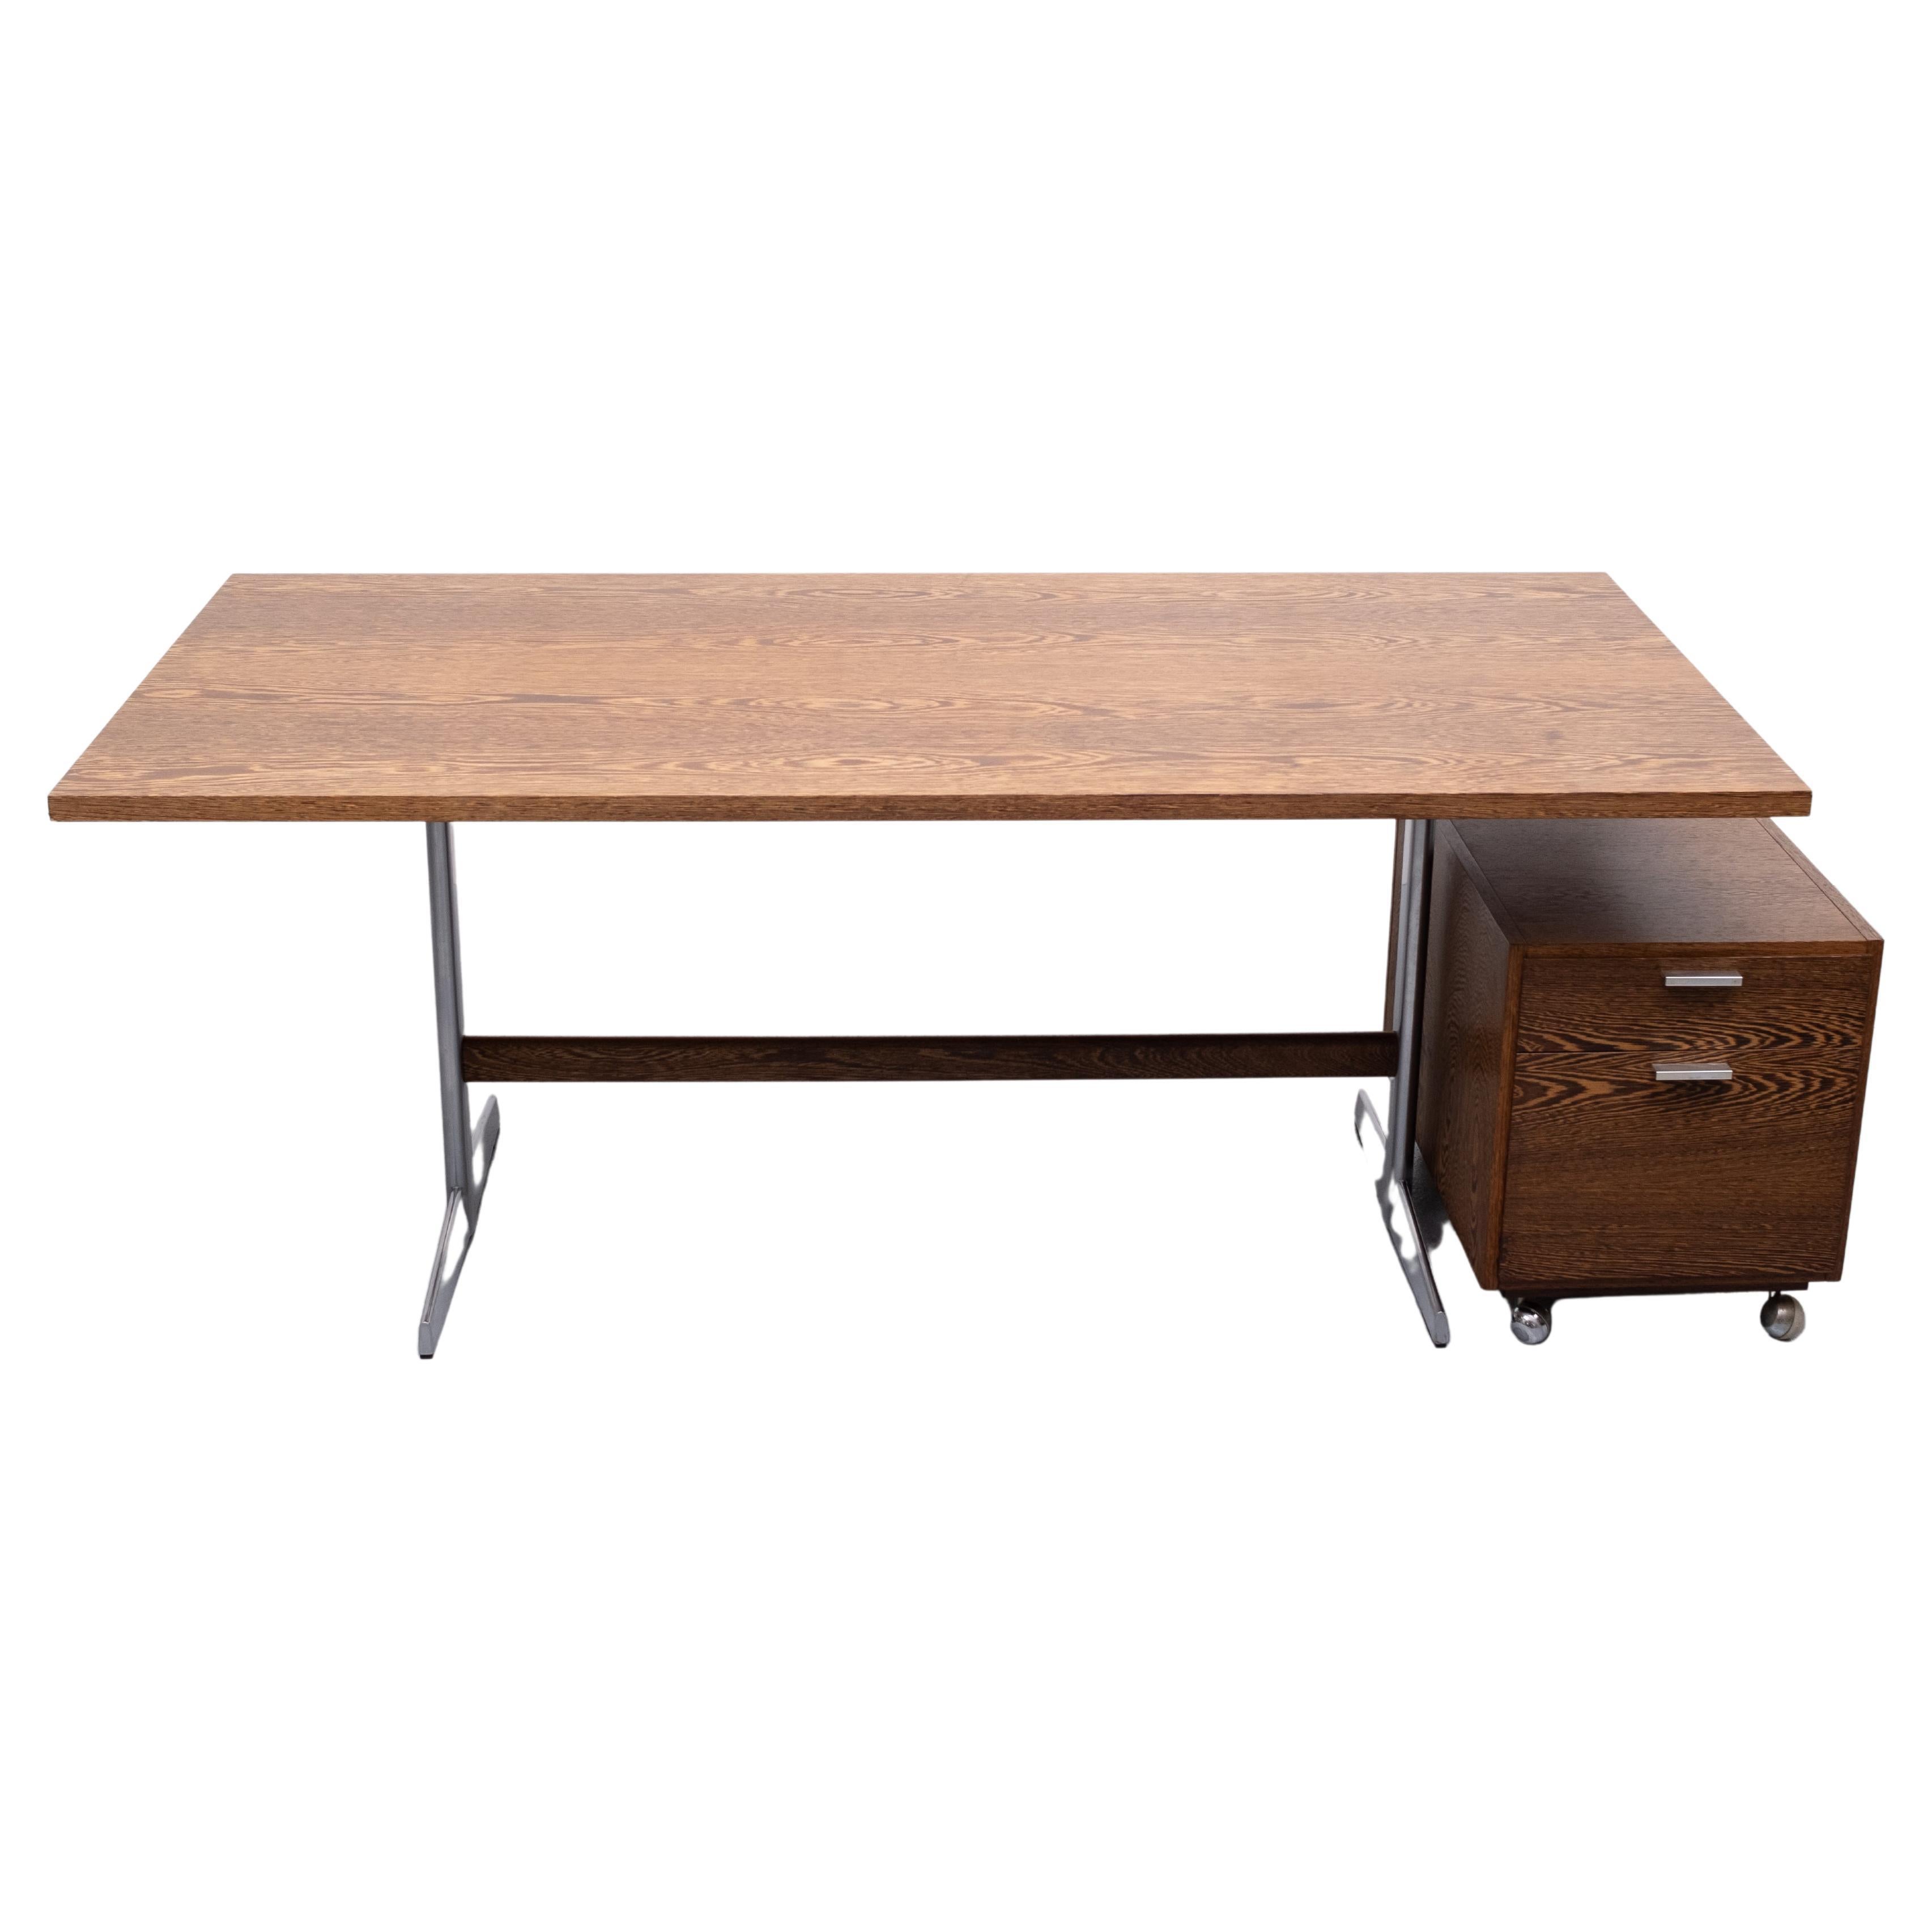 Beautiful Writing desk and matching drawer unit desk. The writing table comes with a Wengé wood 
Top standing on a polished metal feet. Very good quality set. Design by Cees Braakman for Pastoe 'GOED WONEN ' in the 1960s Holland. Good condition.